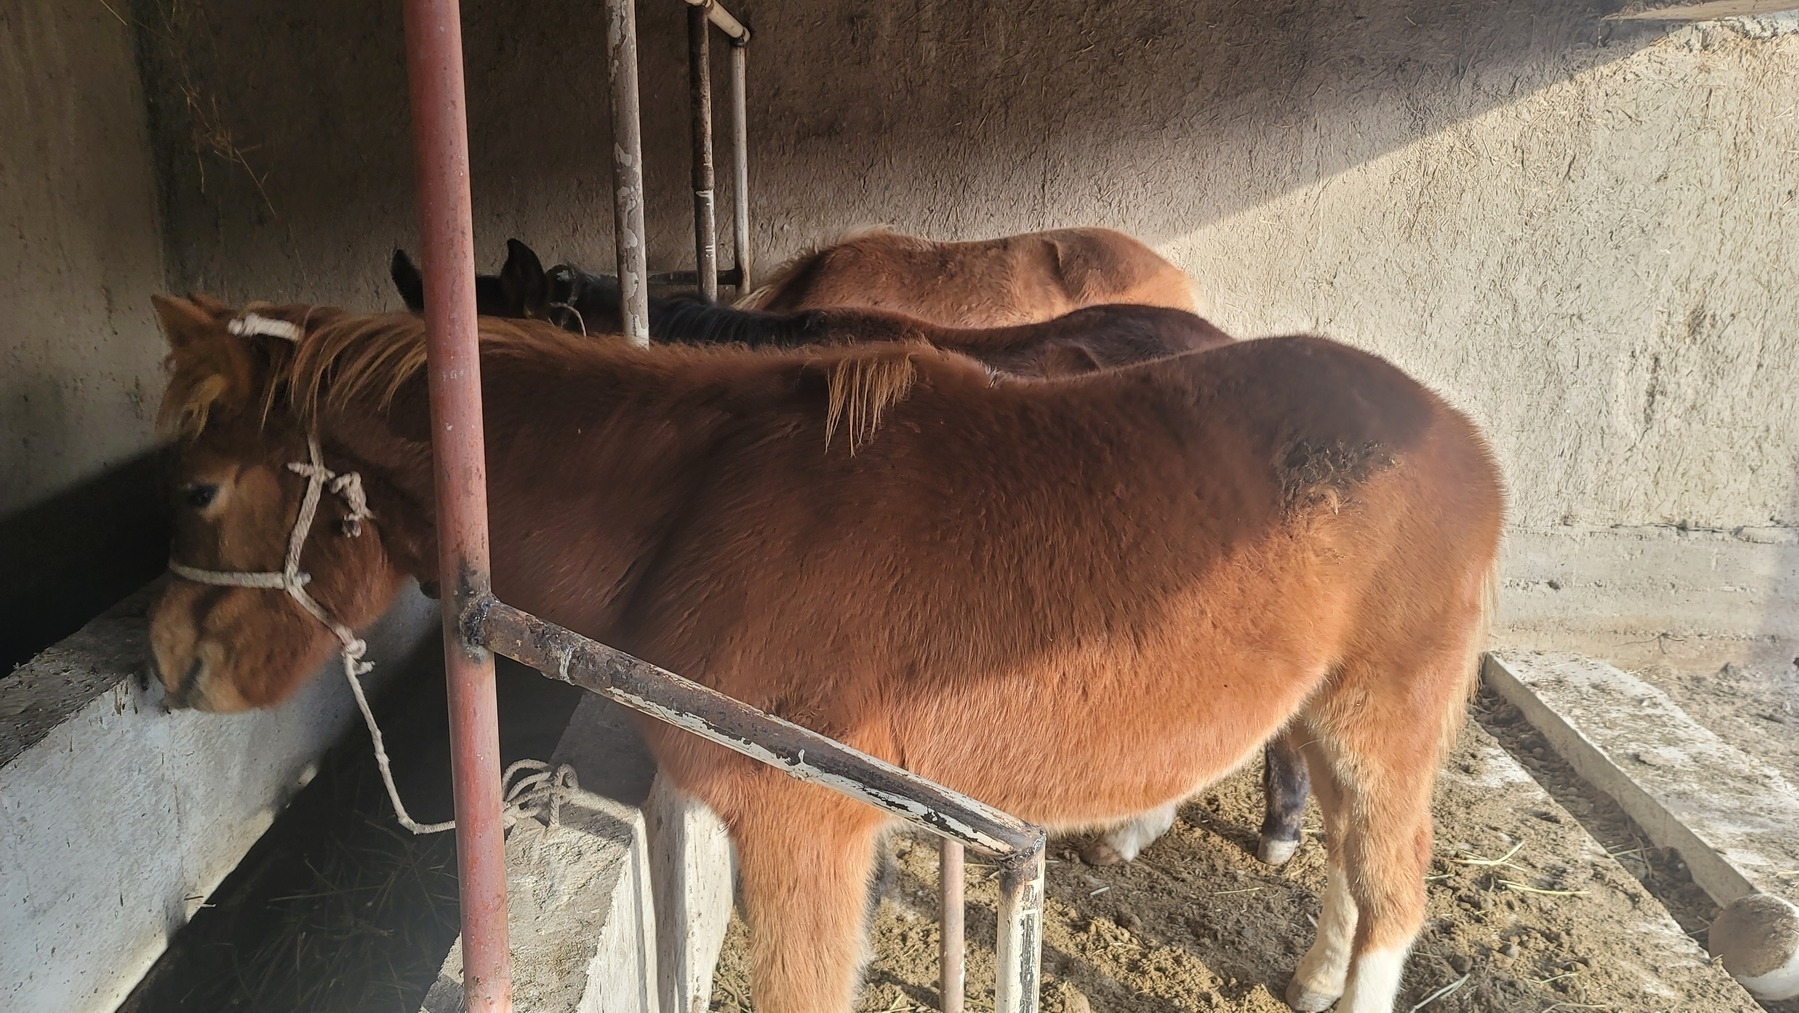 3 brown foals (two light brown, one dark brown) standing side by side at a stall. picture taken from one end of the stall, so main view is of one light brown foal, and two others can barely be seen behind